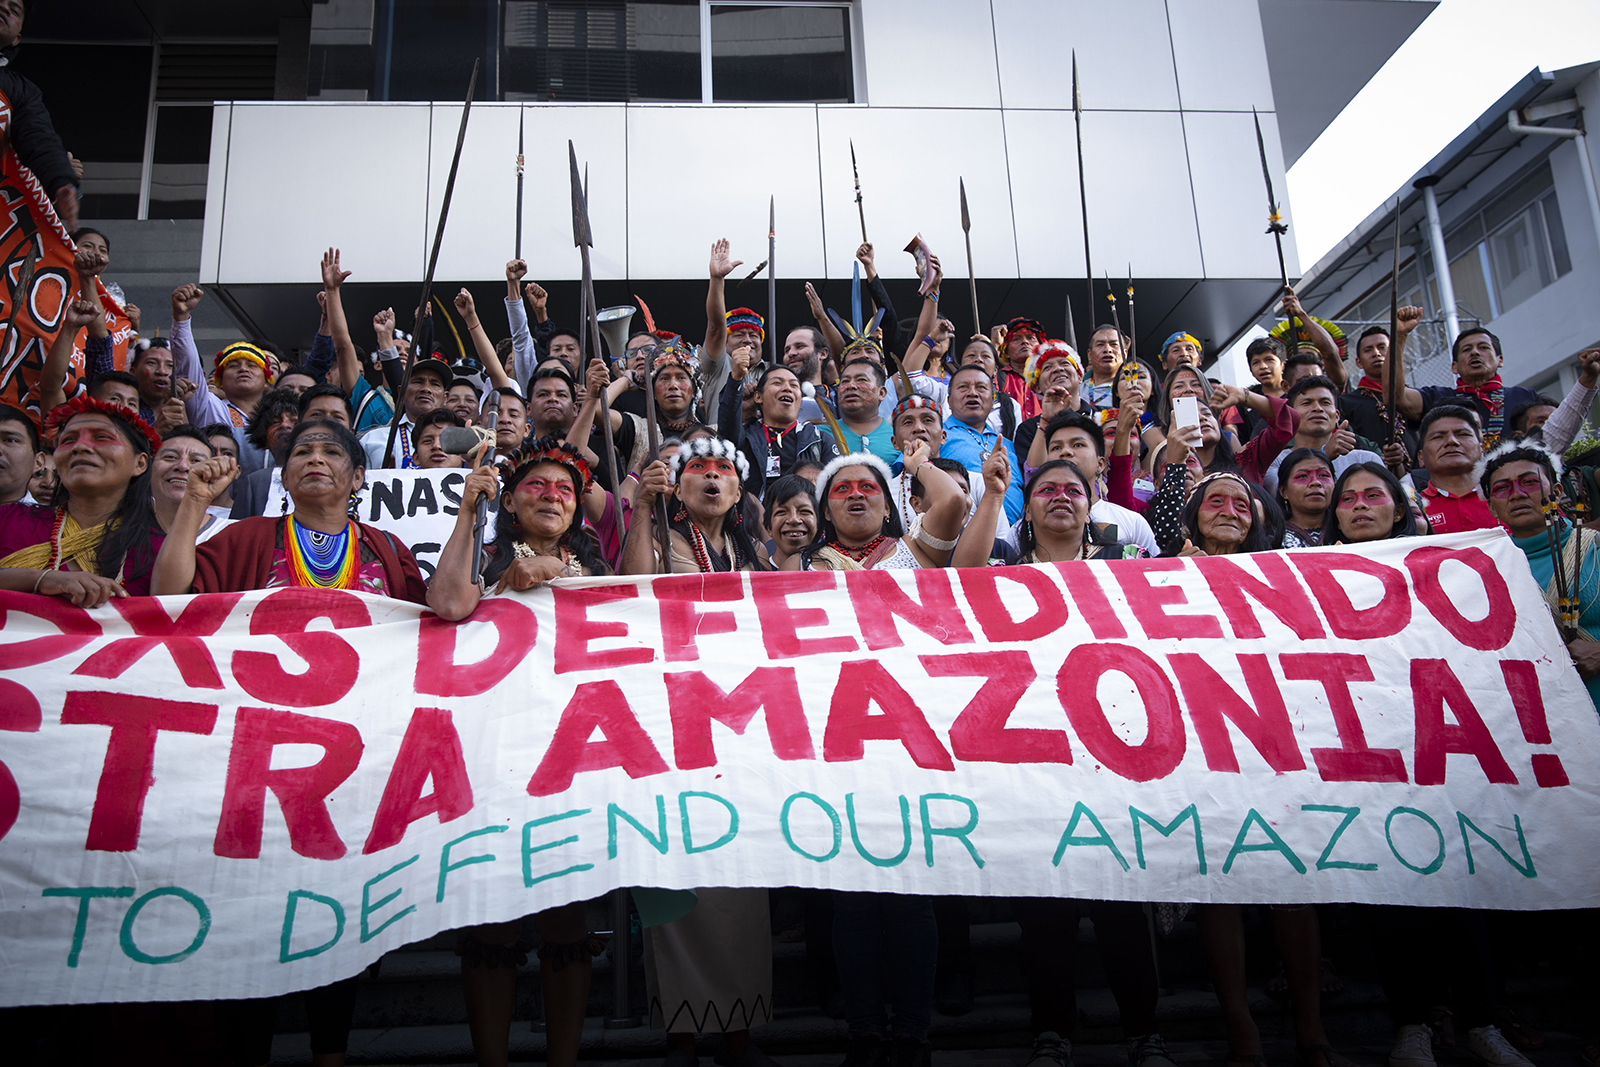 The Waorani people mobilize and unite with other indigenous nations including the Kichwa, Sapara, Andoa, Shiwiar, Achuar and Shuar, whose lives and lands are also threatened by oil drilling in the Ecuadorian Amazon.